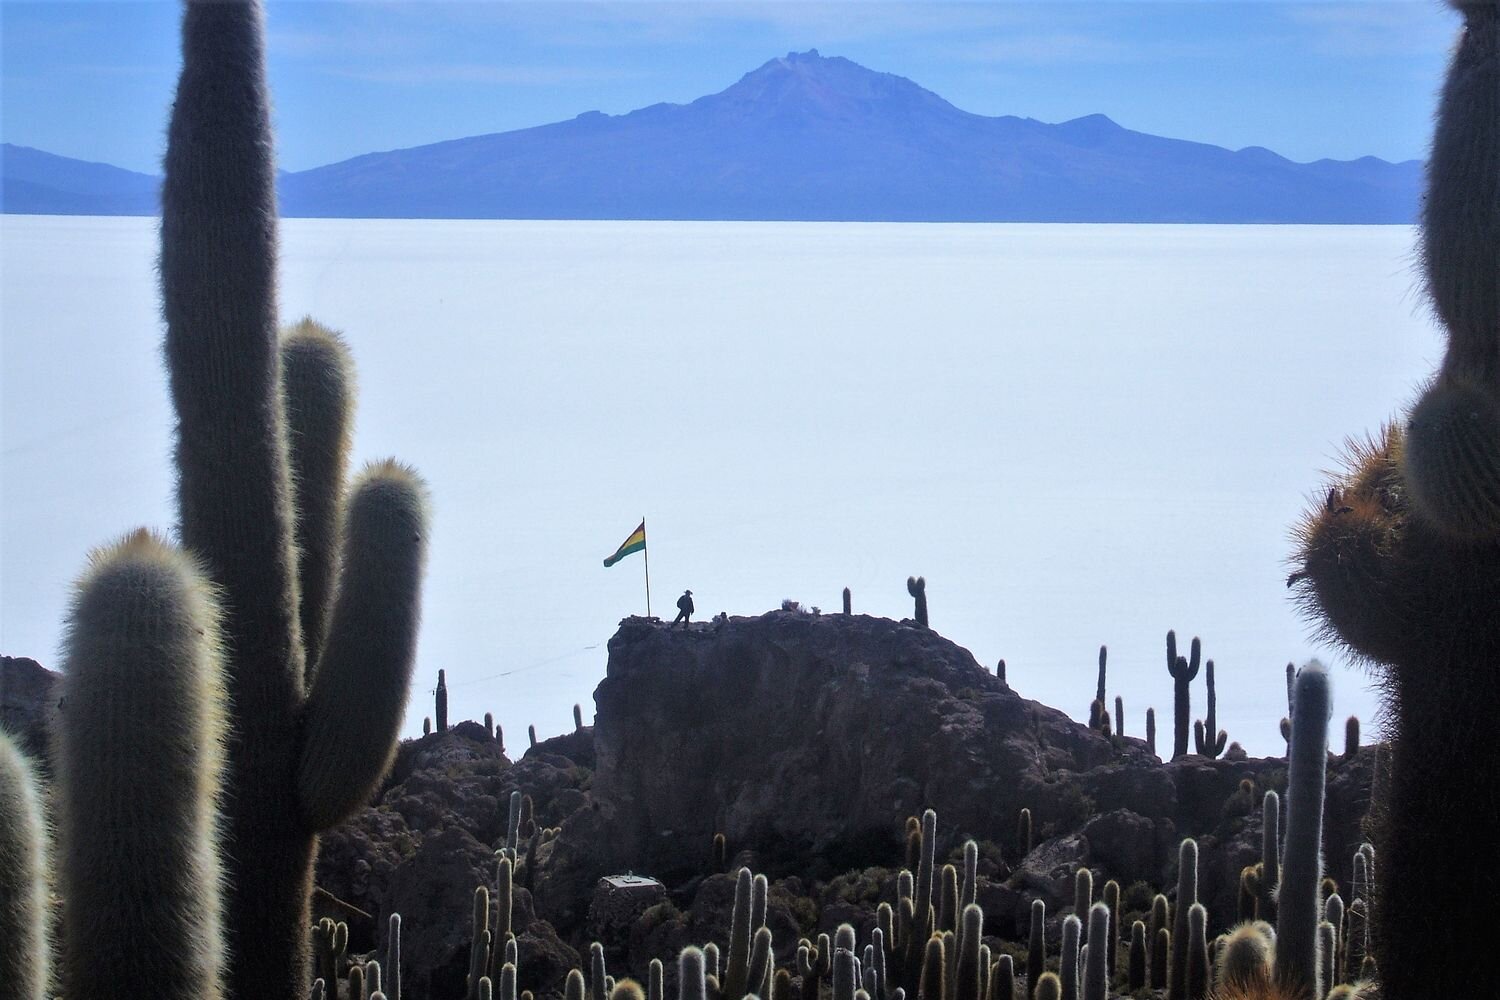  A view of the Uyuni Salt Flat and Tunupa volcano in the background, from Pescado Island.  